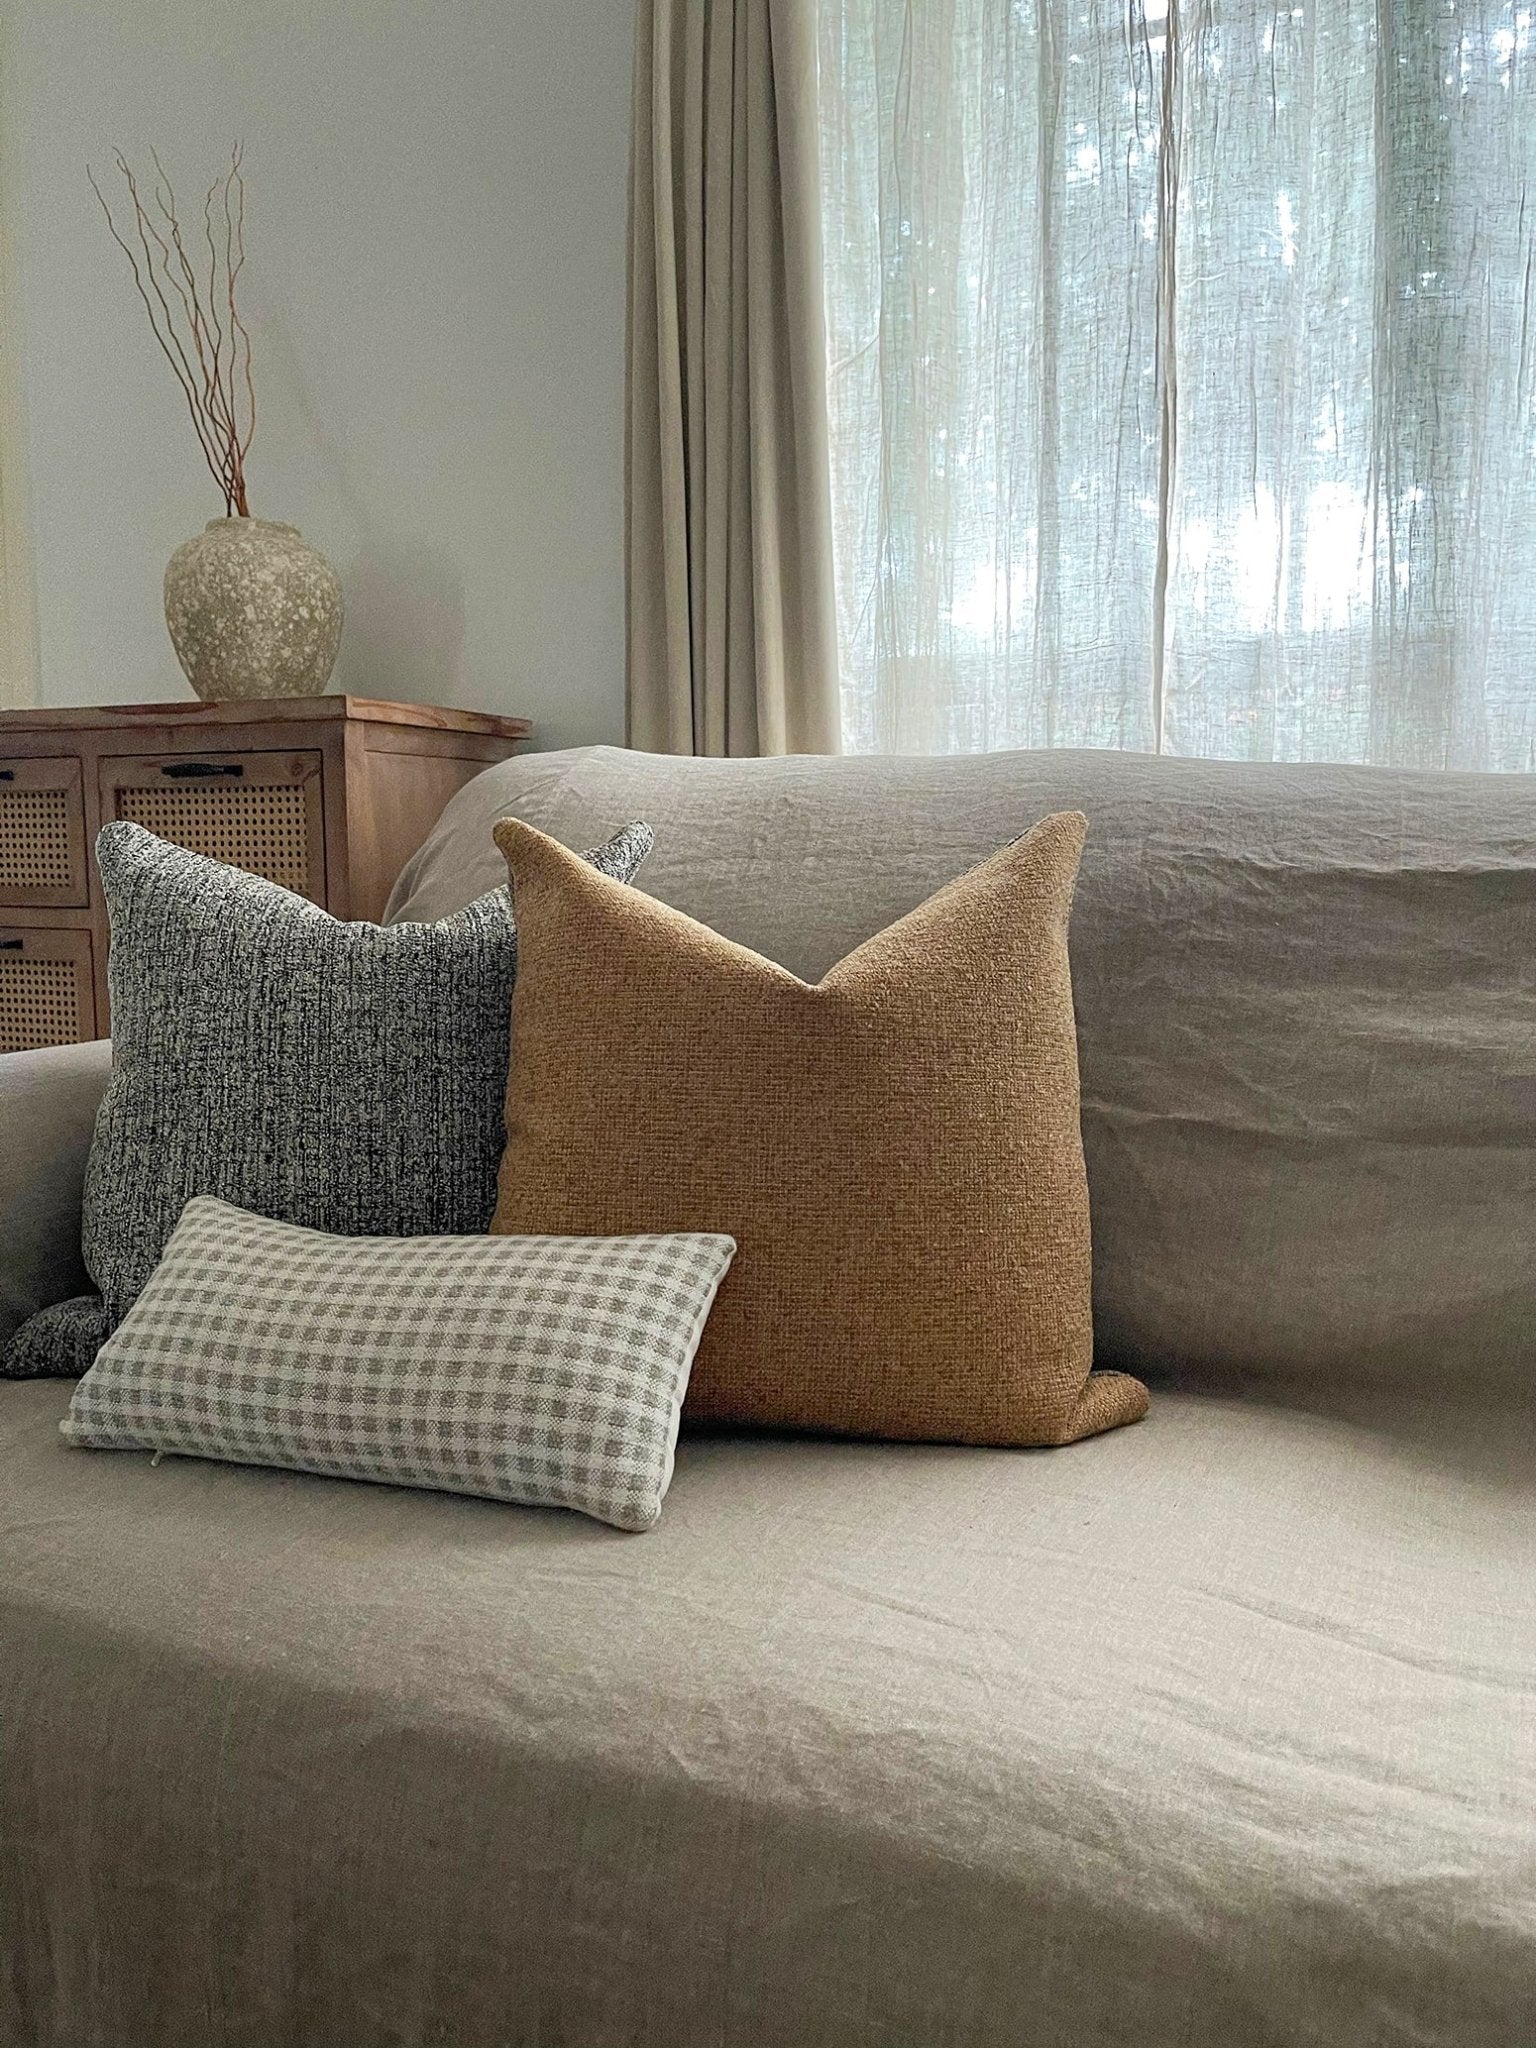 A neutral pillow set for sofa couch features sandy tan boucle throw pillow styled in midcentury modern rustic setting